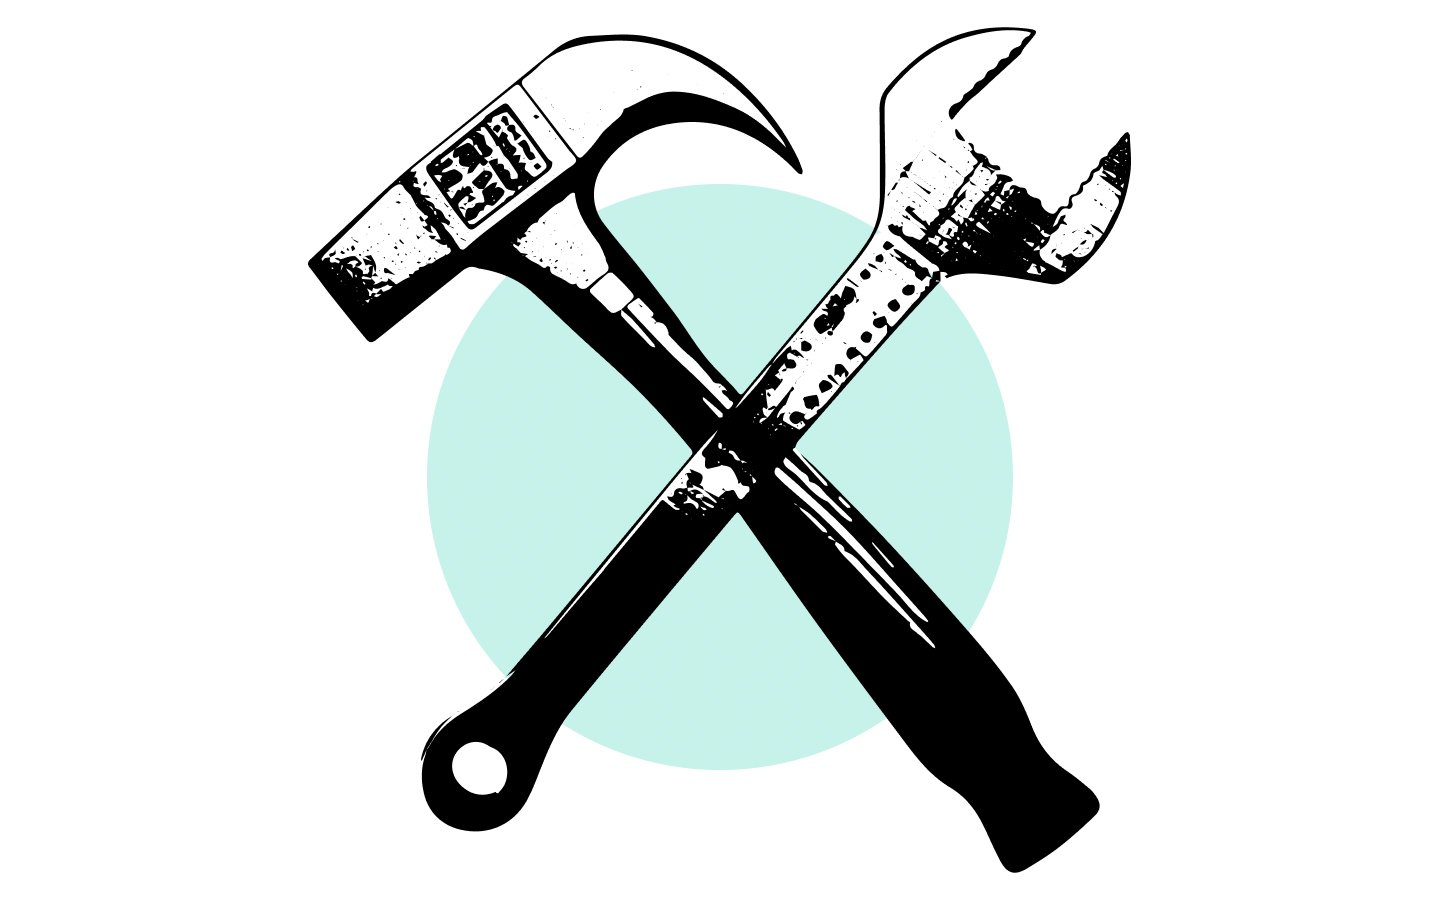 A hammer and spanner - Tools to make your day-to-day sales easier